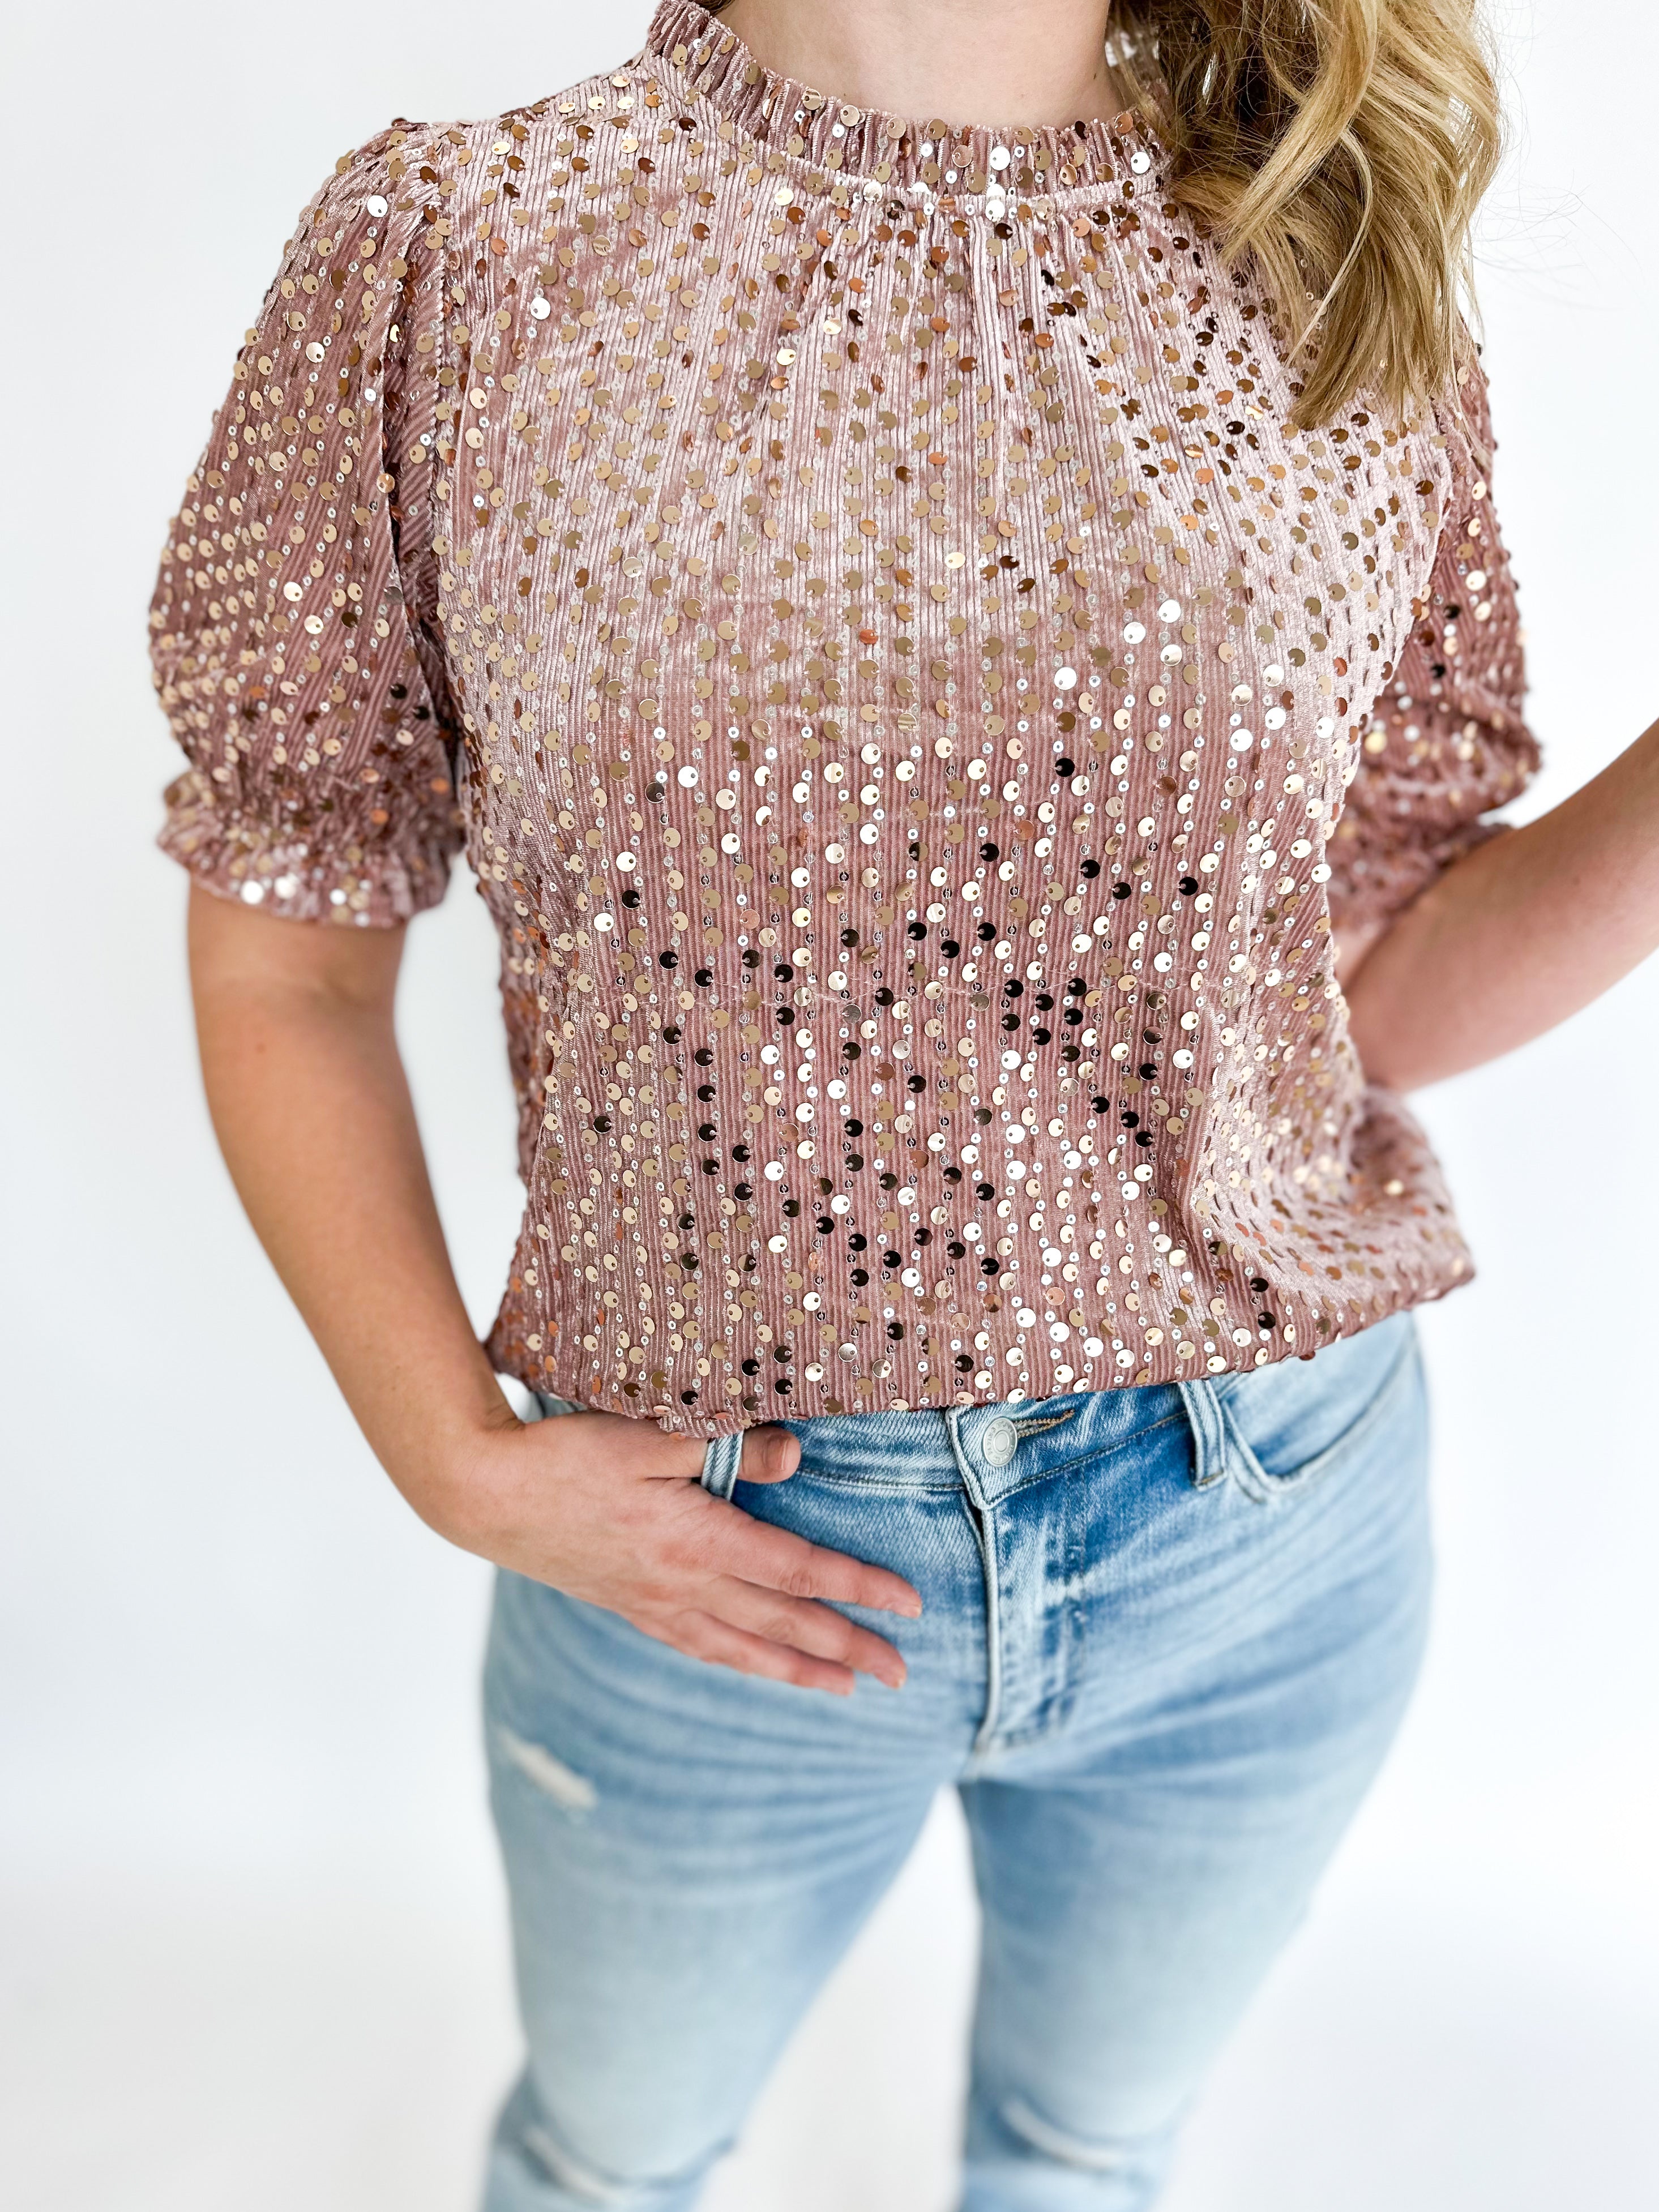 Blush Sequin Party Blouse-200 Fashion Blouses-THML-July & June Women's Fashion Boutique Located in San Antonio, Texas